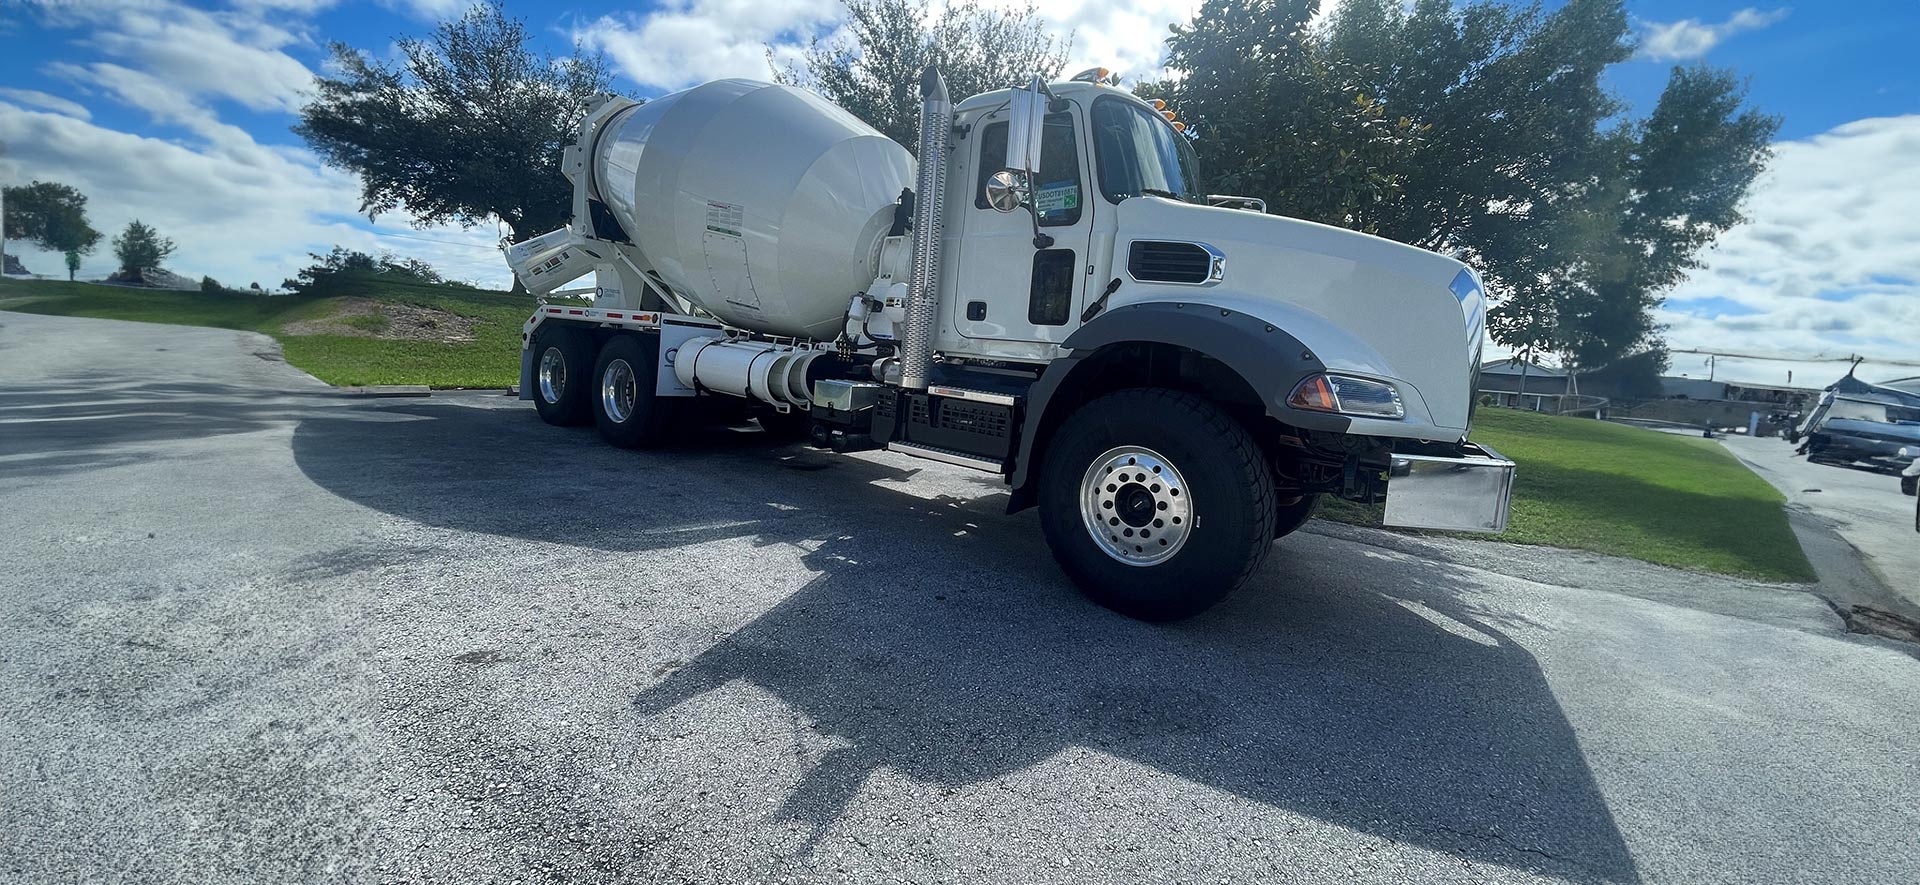 A cement truck is parked on the side of the road.